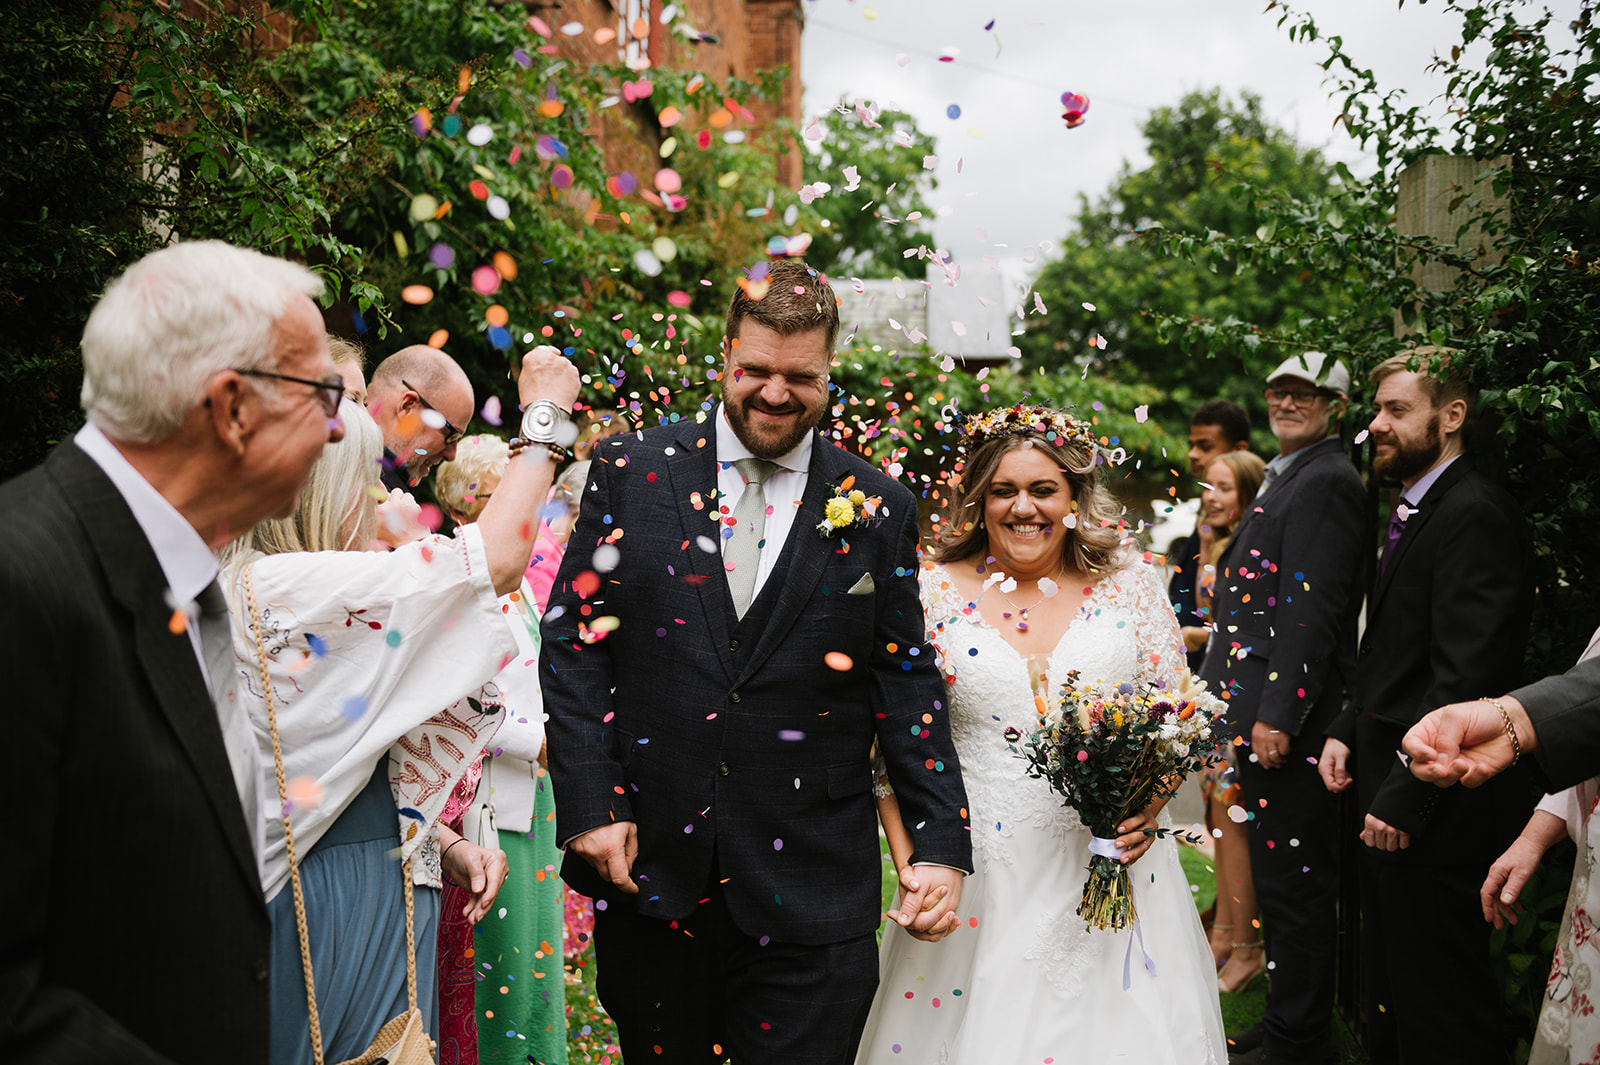 The bride and groom walking through a flurry of colourful confetti in the garden at Hundred House Hotel